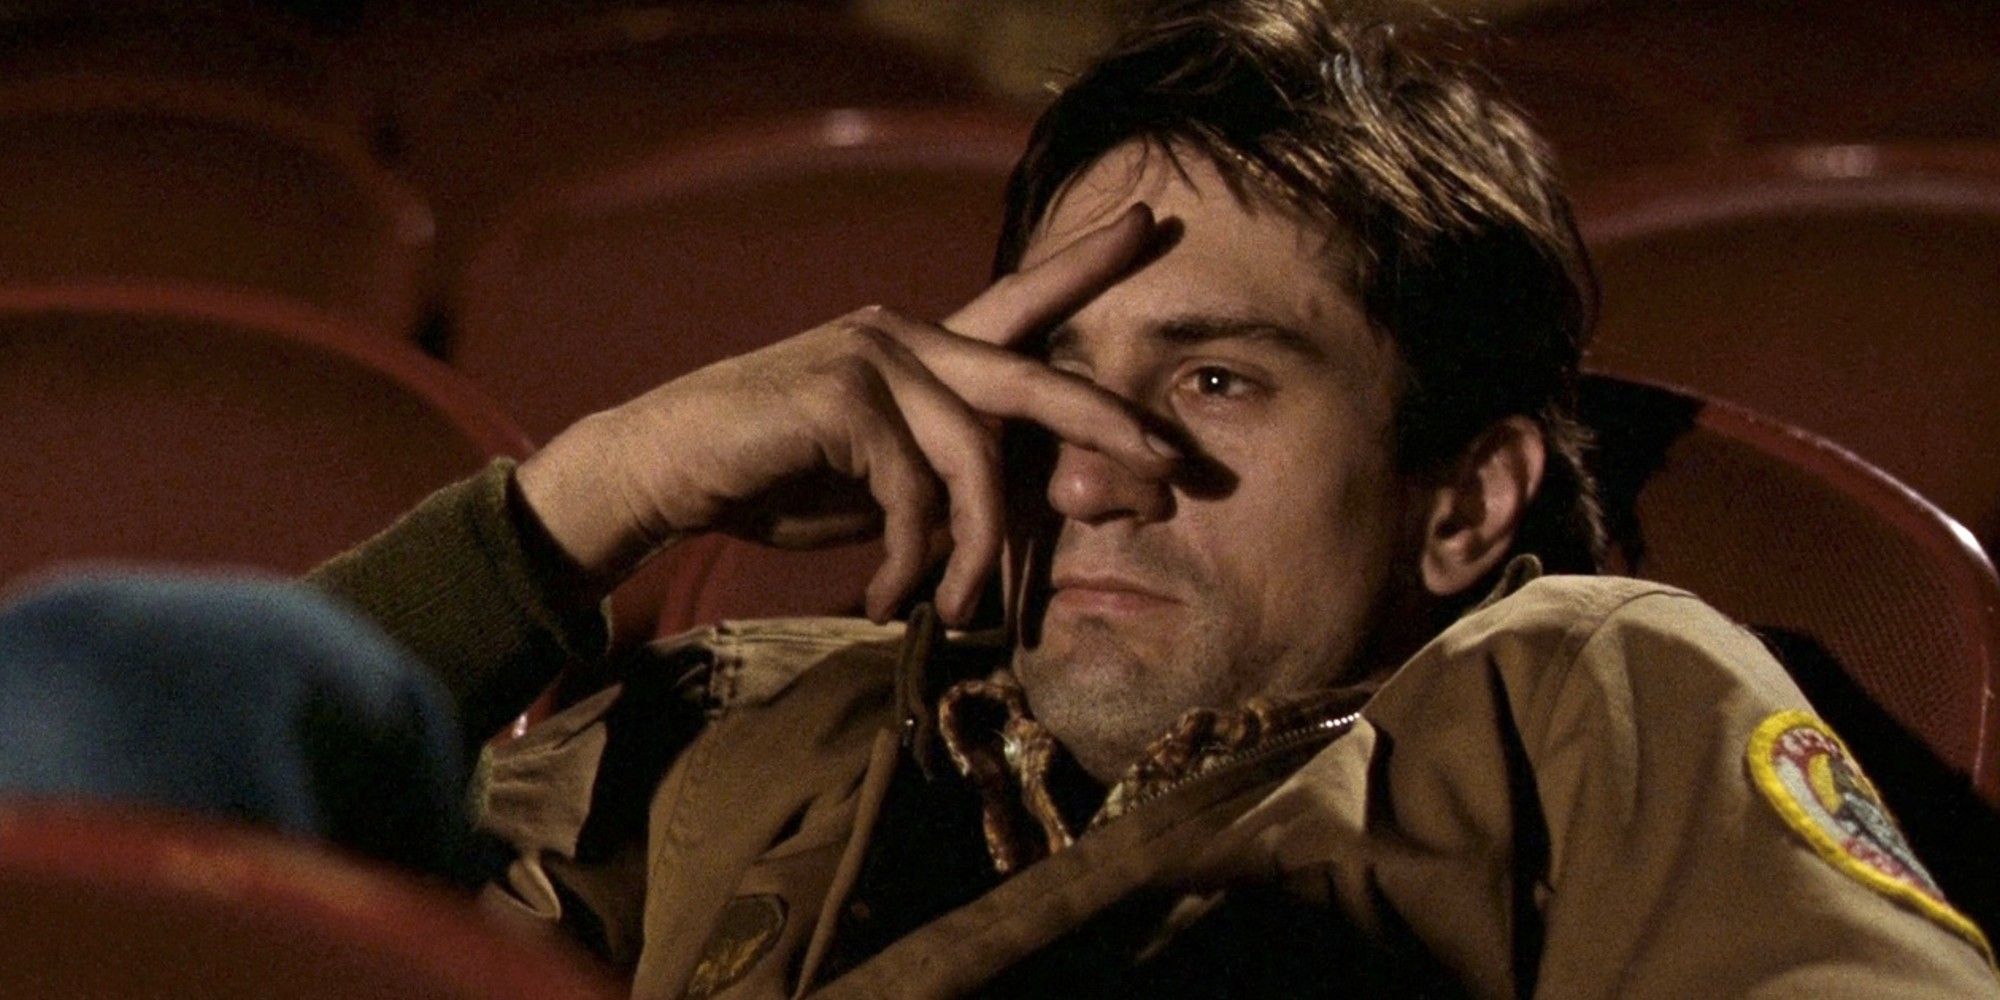 Travis Bickley at the movie theater with his hand half-covering his eyes in Taxi Driver.